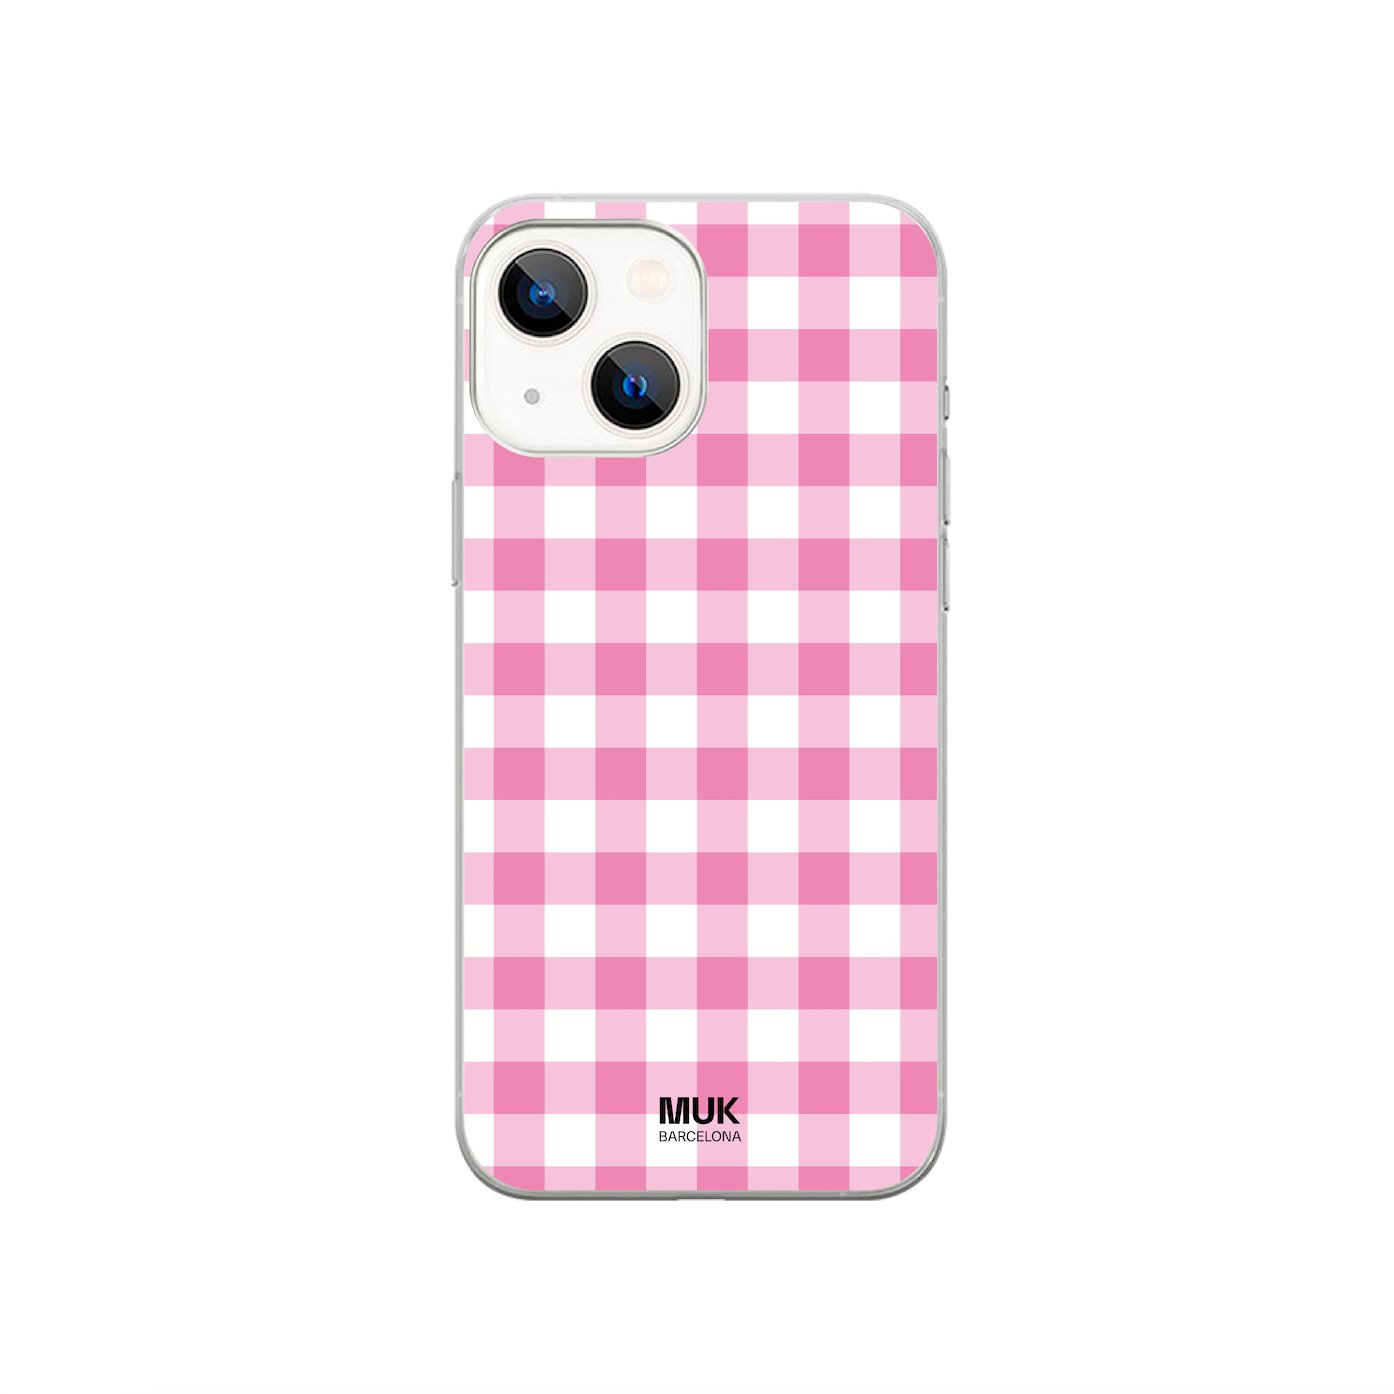 Clear Phone Case with Vichy check pattern in pink, red and white.
